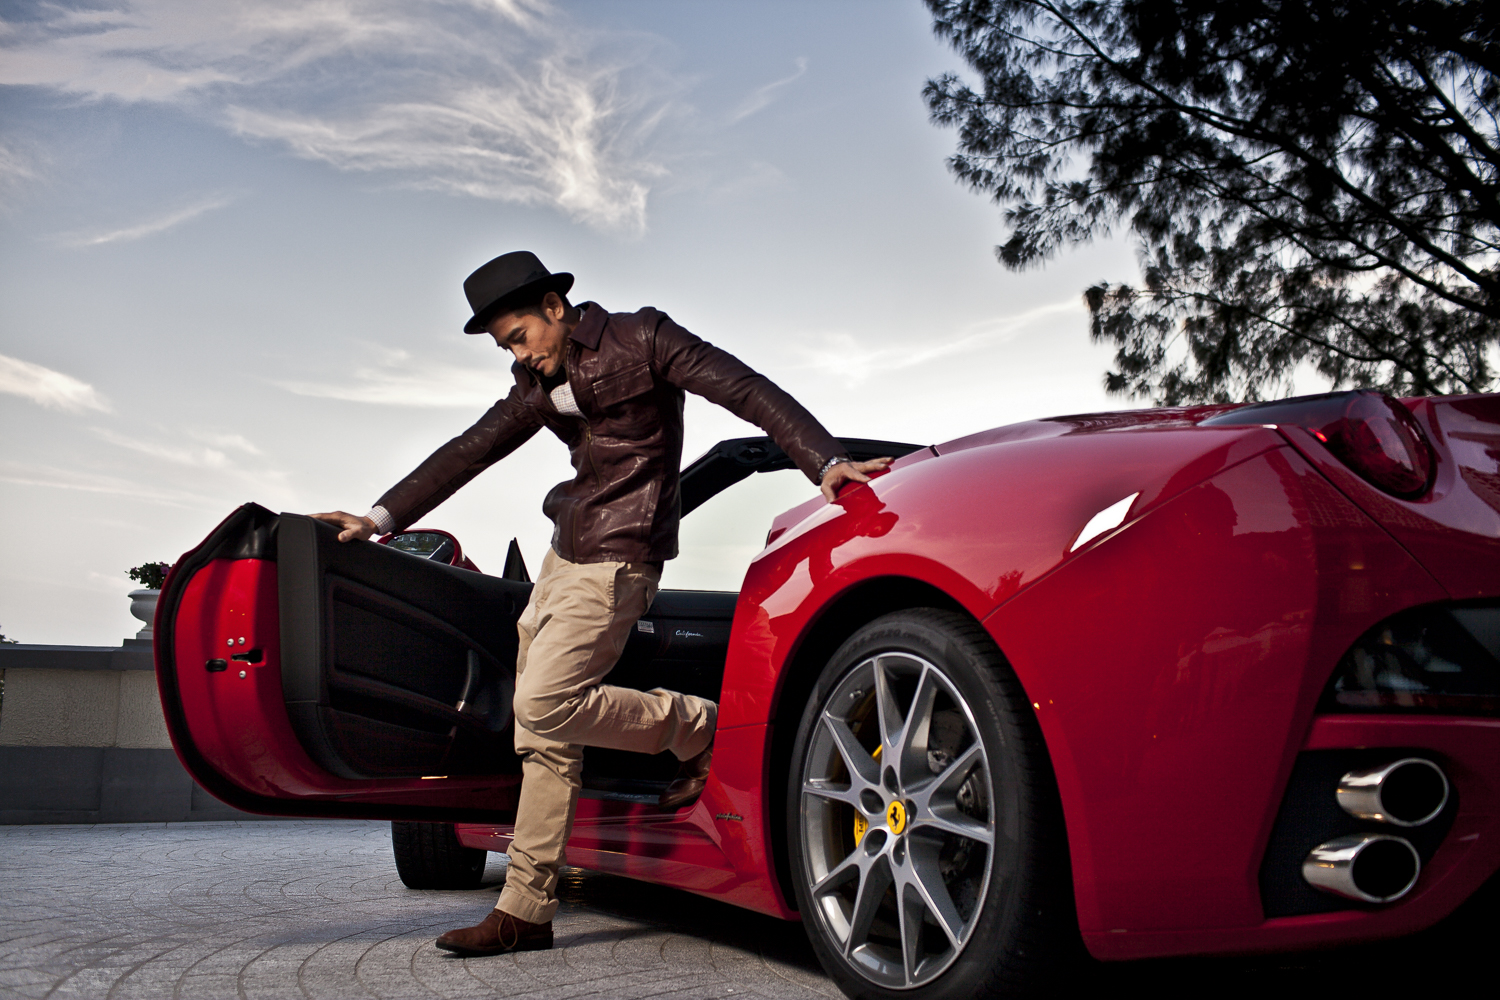 Aaron Kwok, actor and singer in Hong Kong. For Ferrari Magazine